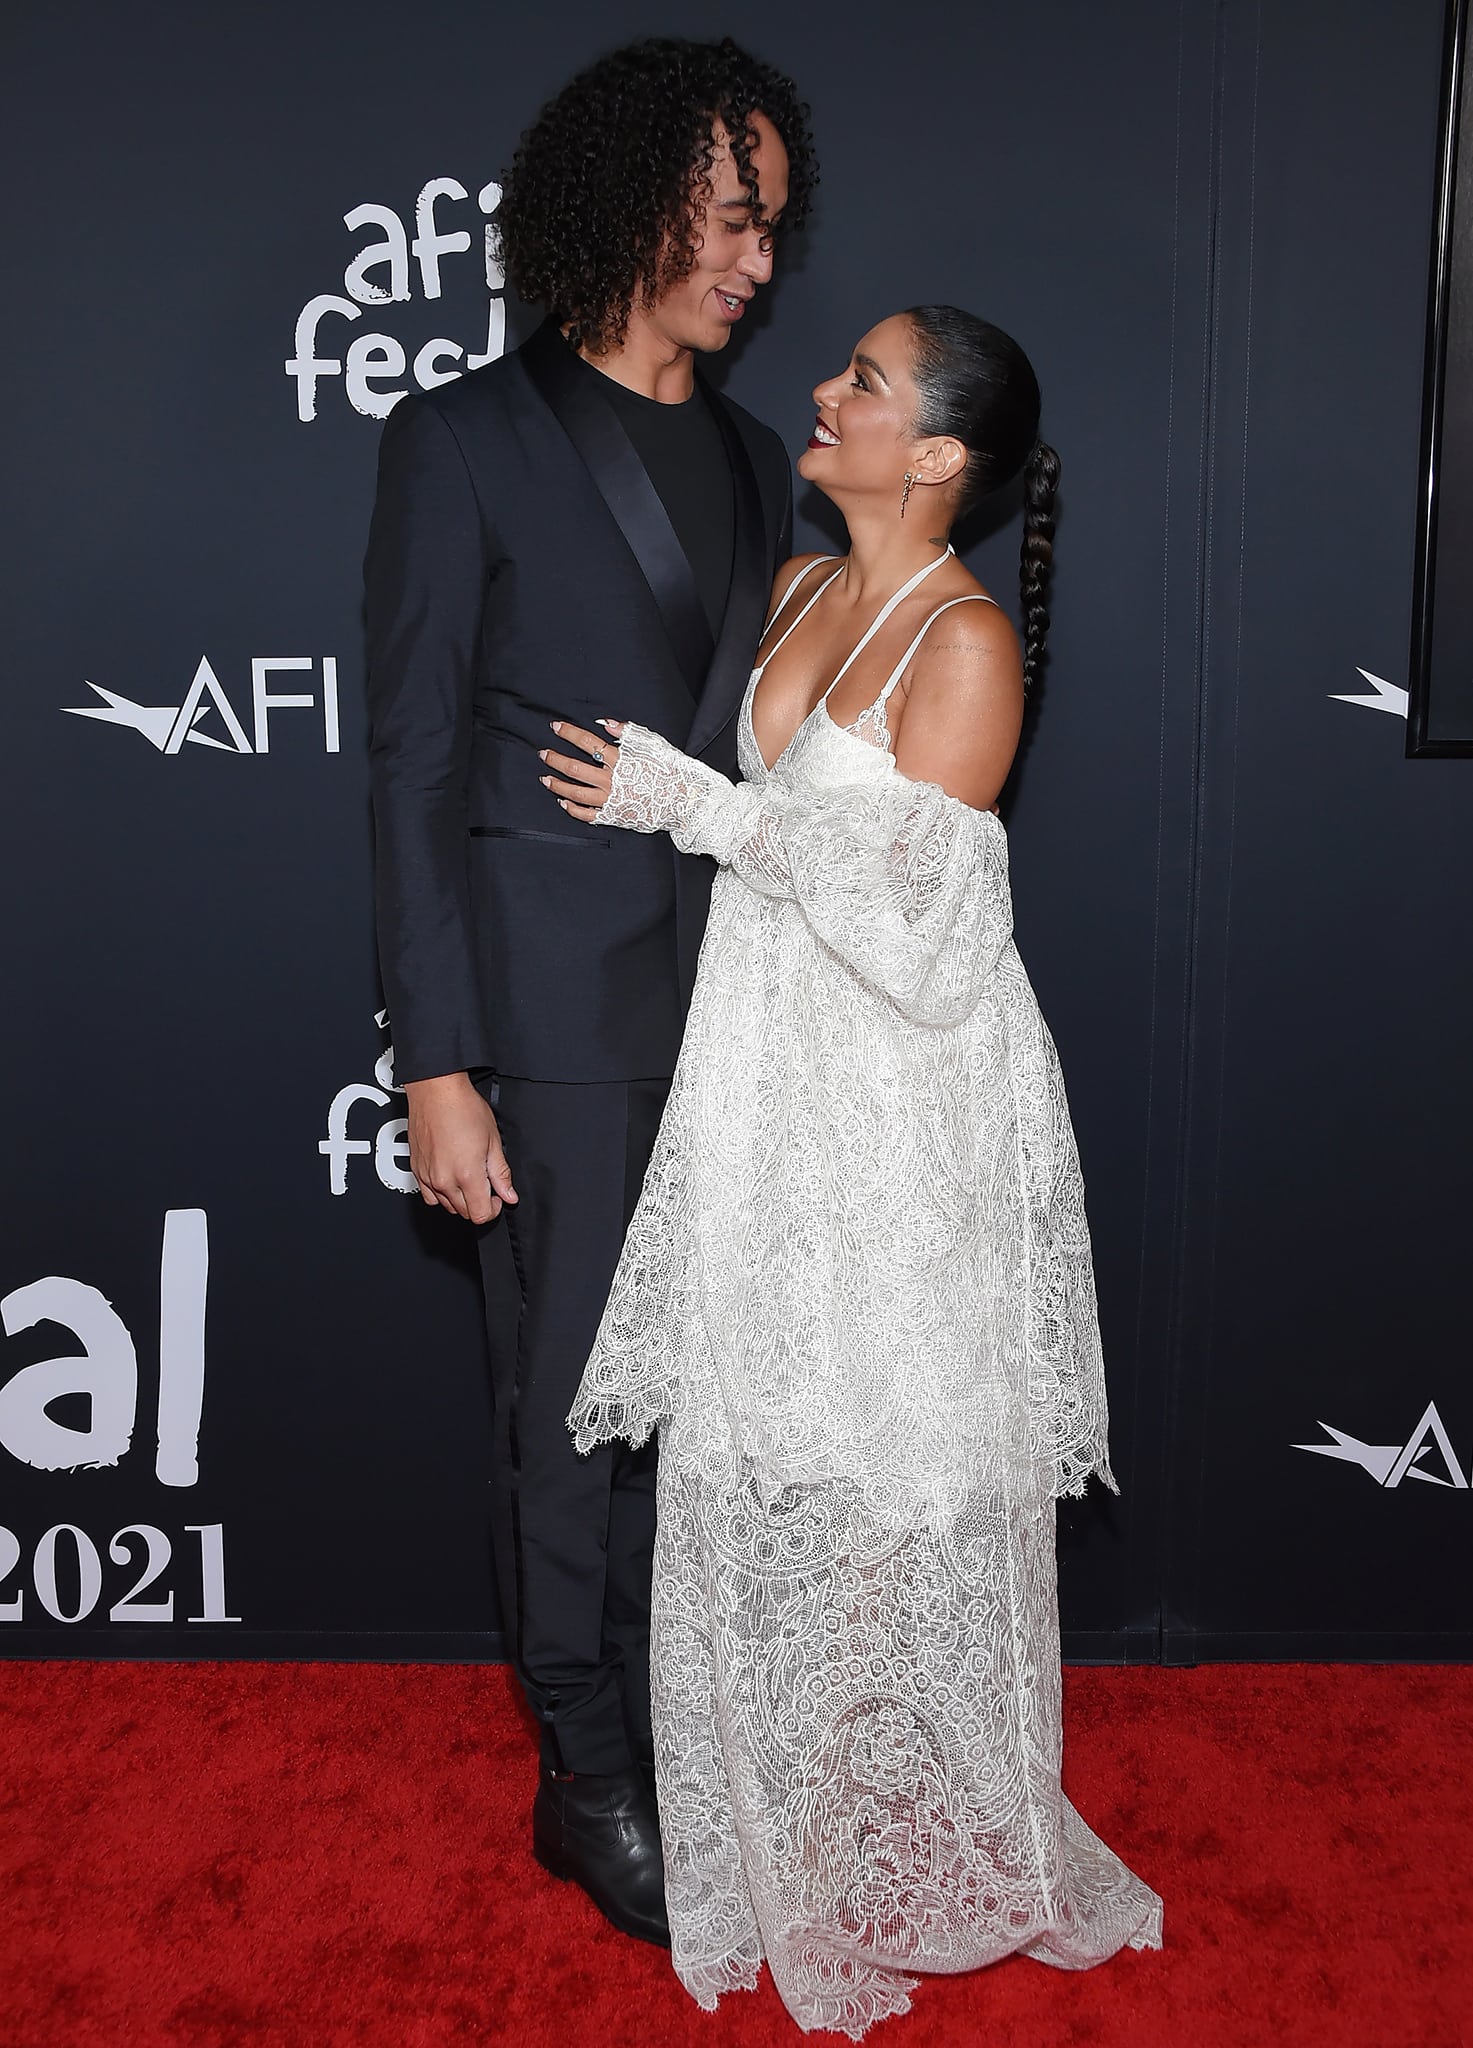 Cole Tucker and Vanessa Hudgens make red carpet debut as a couple at the 2021 AFI Fest Opening Night Gala premiere of Tick, Tick, Boom! on November 10, 2021